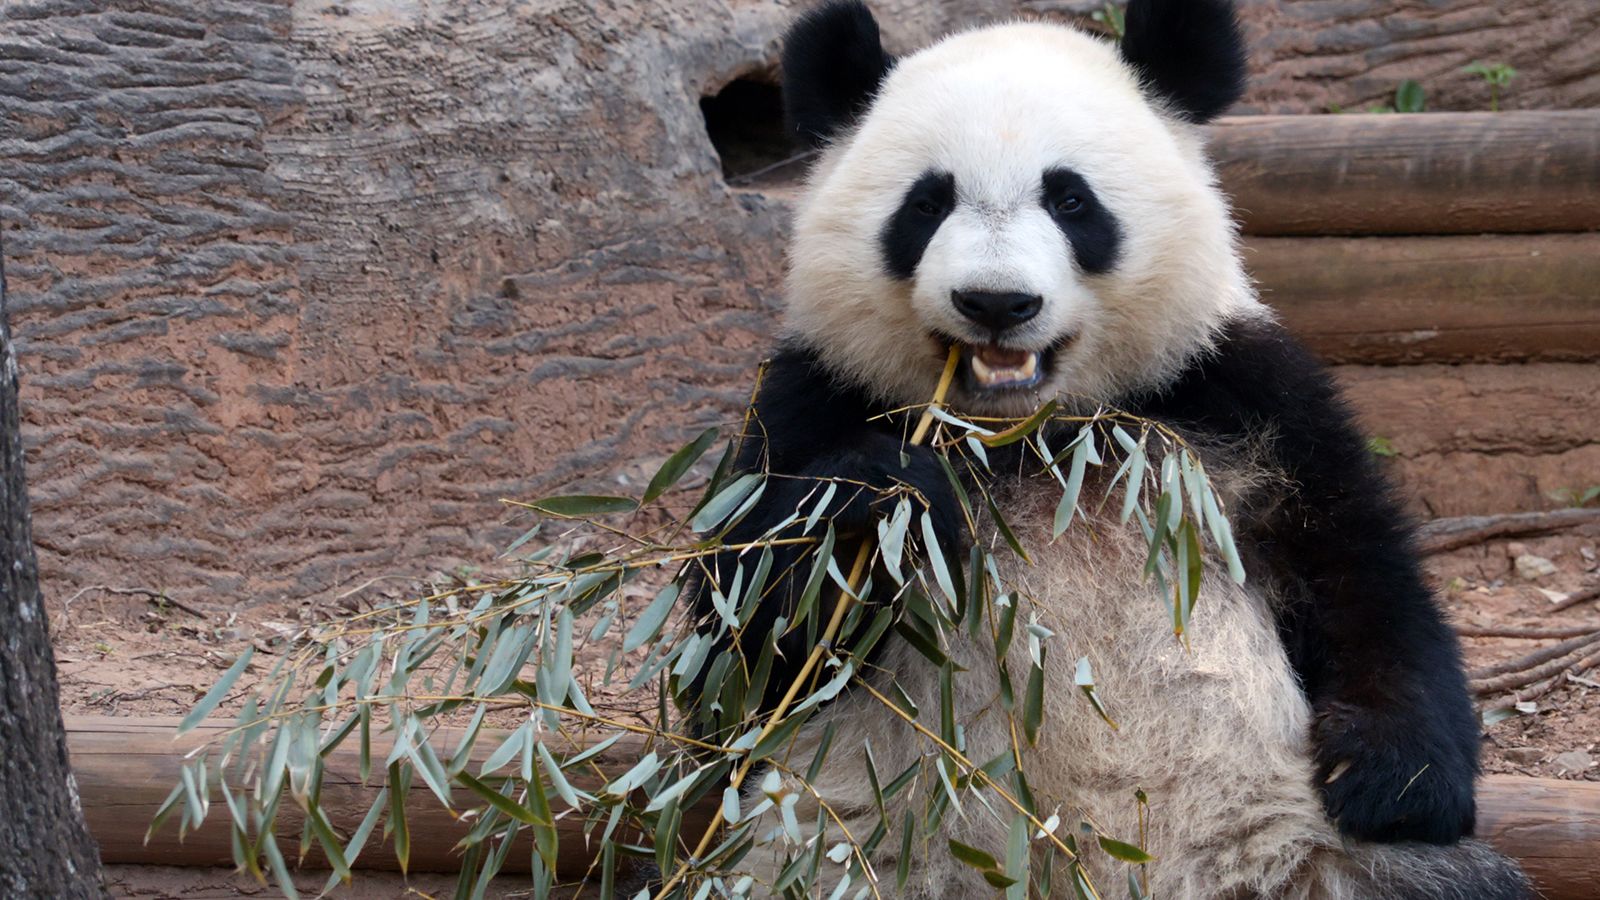 How America Fell in Love With the Giant Panda